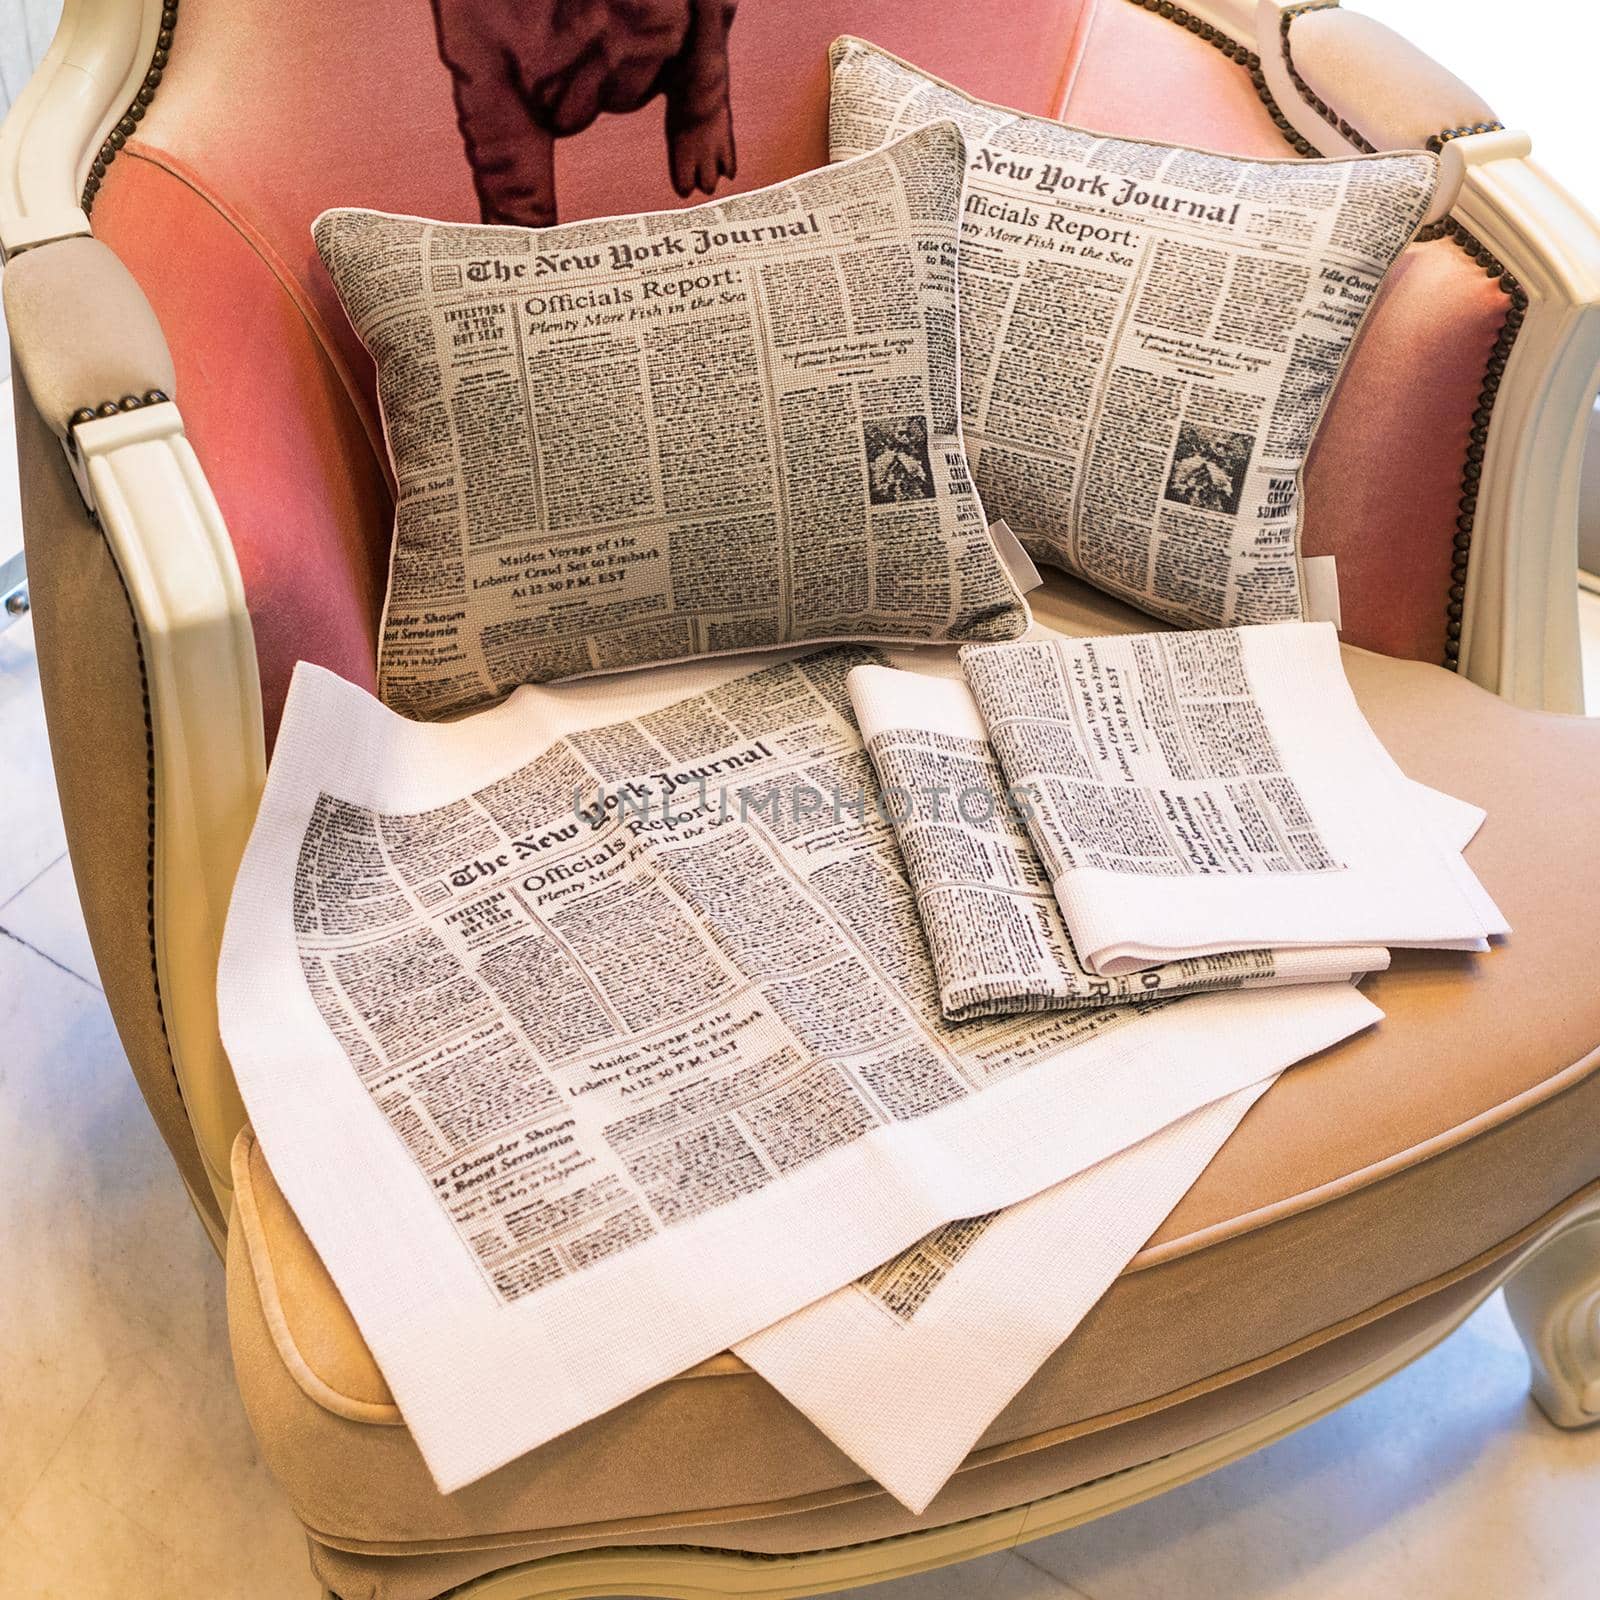 Set of colorful pillow on the showcase, newspaper style